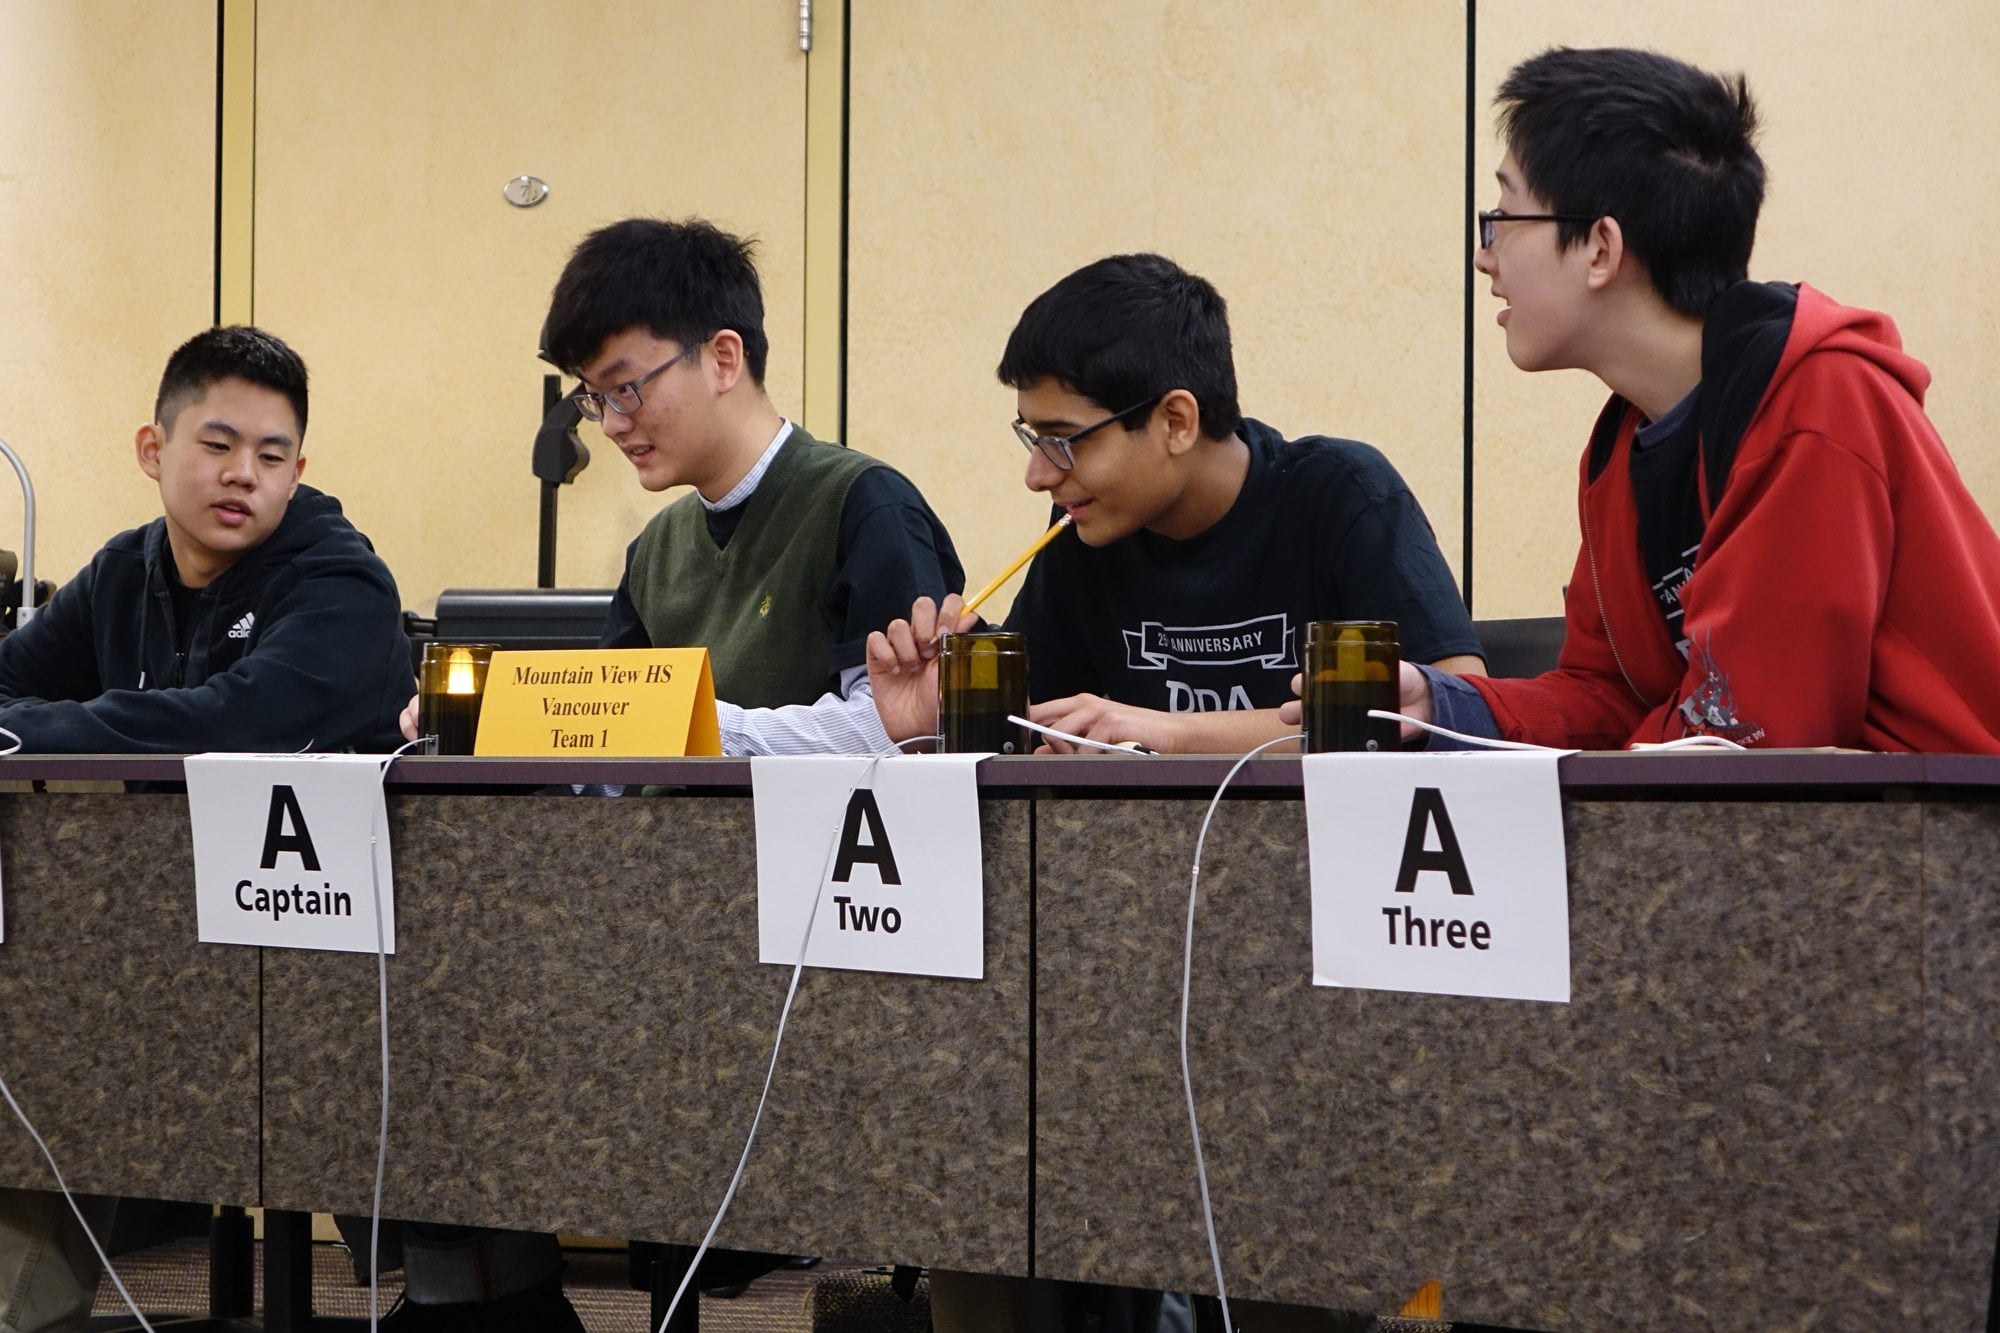 Mountain View High School Team 1 of the Evergreen School District performed the best of the schools in your readership. They persevered through Round 10 in the afternoon Double Elimination Rounds. Pictured are Mark Chen, team captain Ming Liu, Suyash Gupta and Kevin Gao.